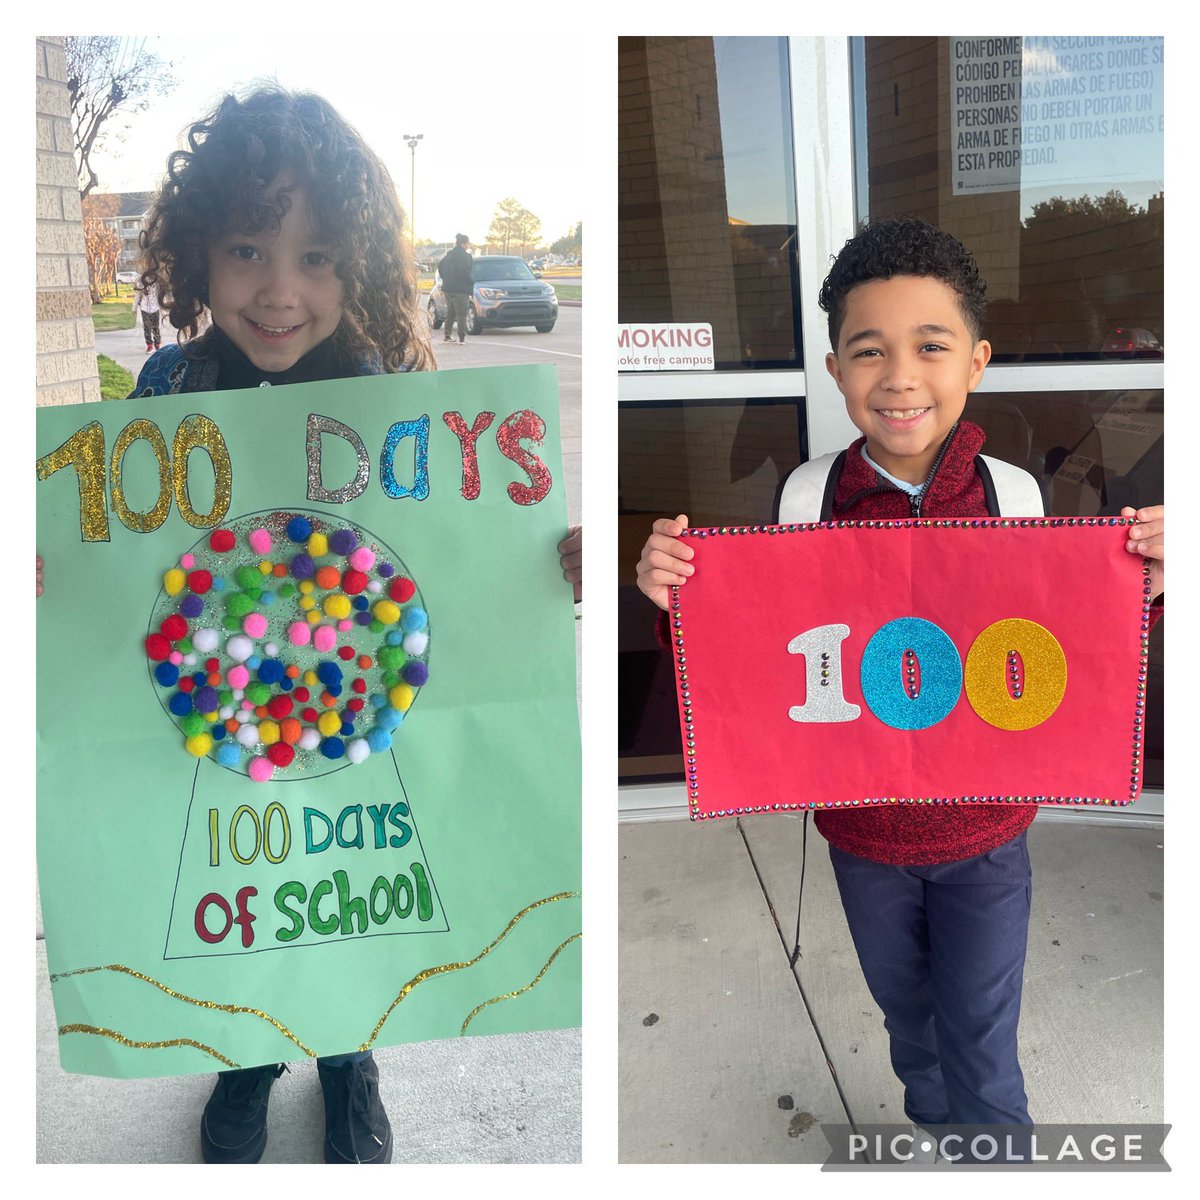 100 Days Wiser! 100 Days Smarter! 100 Days of Growth! Hummingbirds enjoyed creating posters, and dressing up to celebrate the 100th day of school! #HummingbirdsFly @kimtoneyHMQ